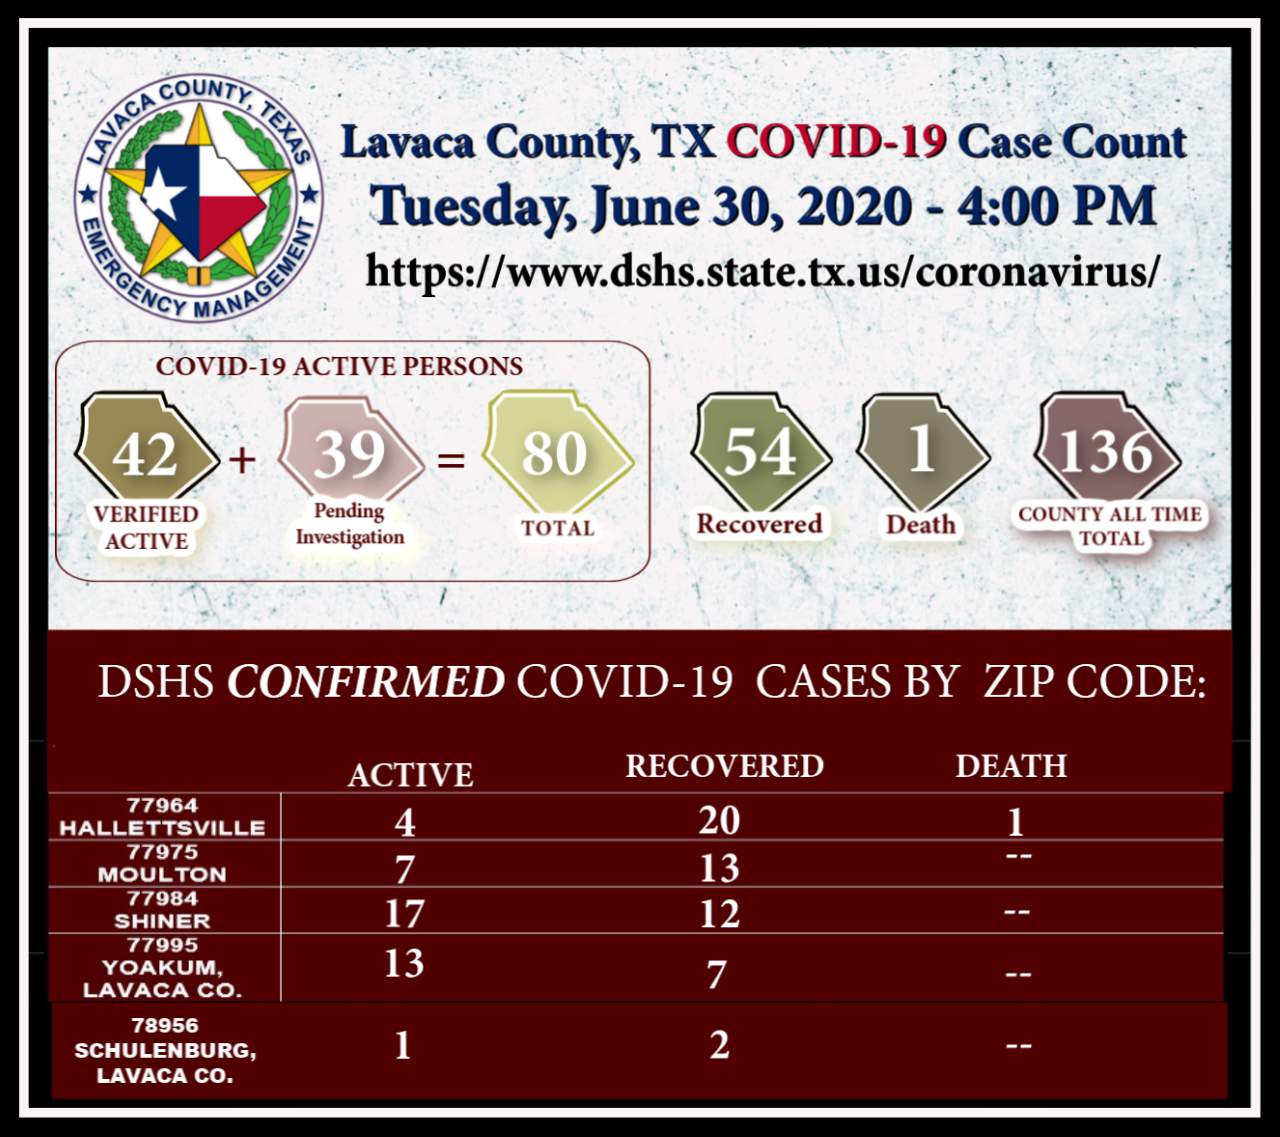 Lavaca County reports 4 new cases of COVID-19, brings total to 42 active cases